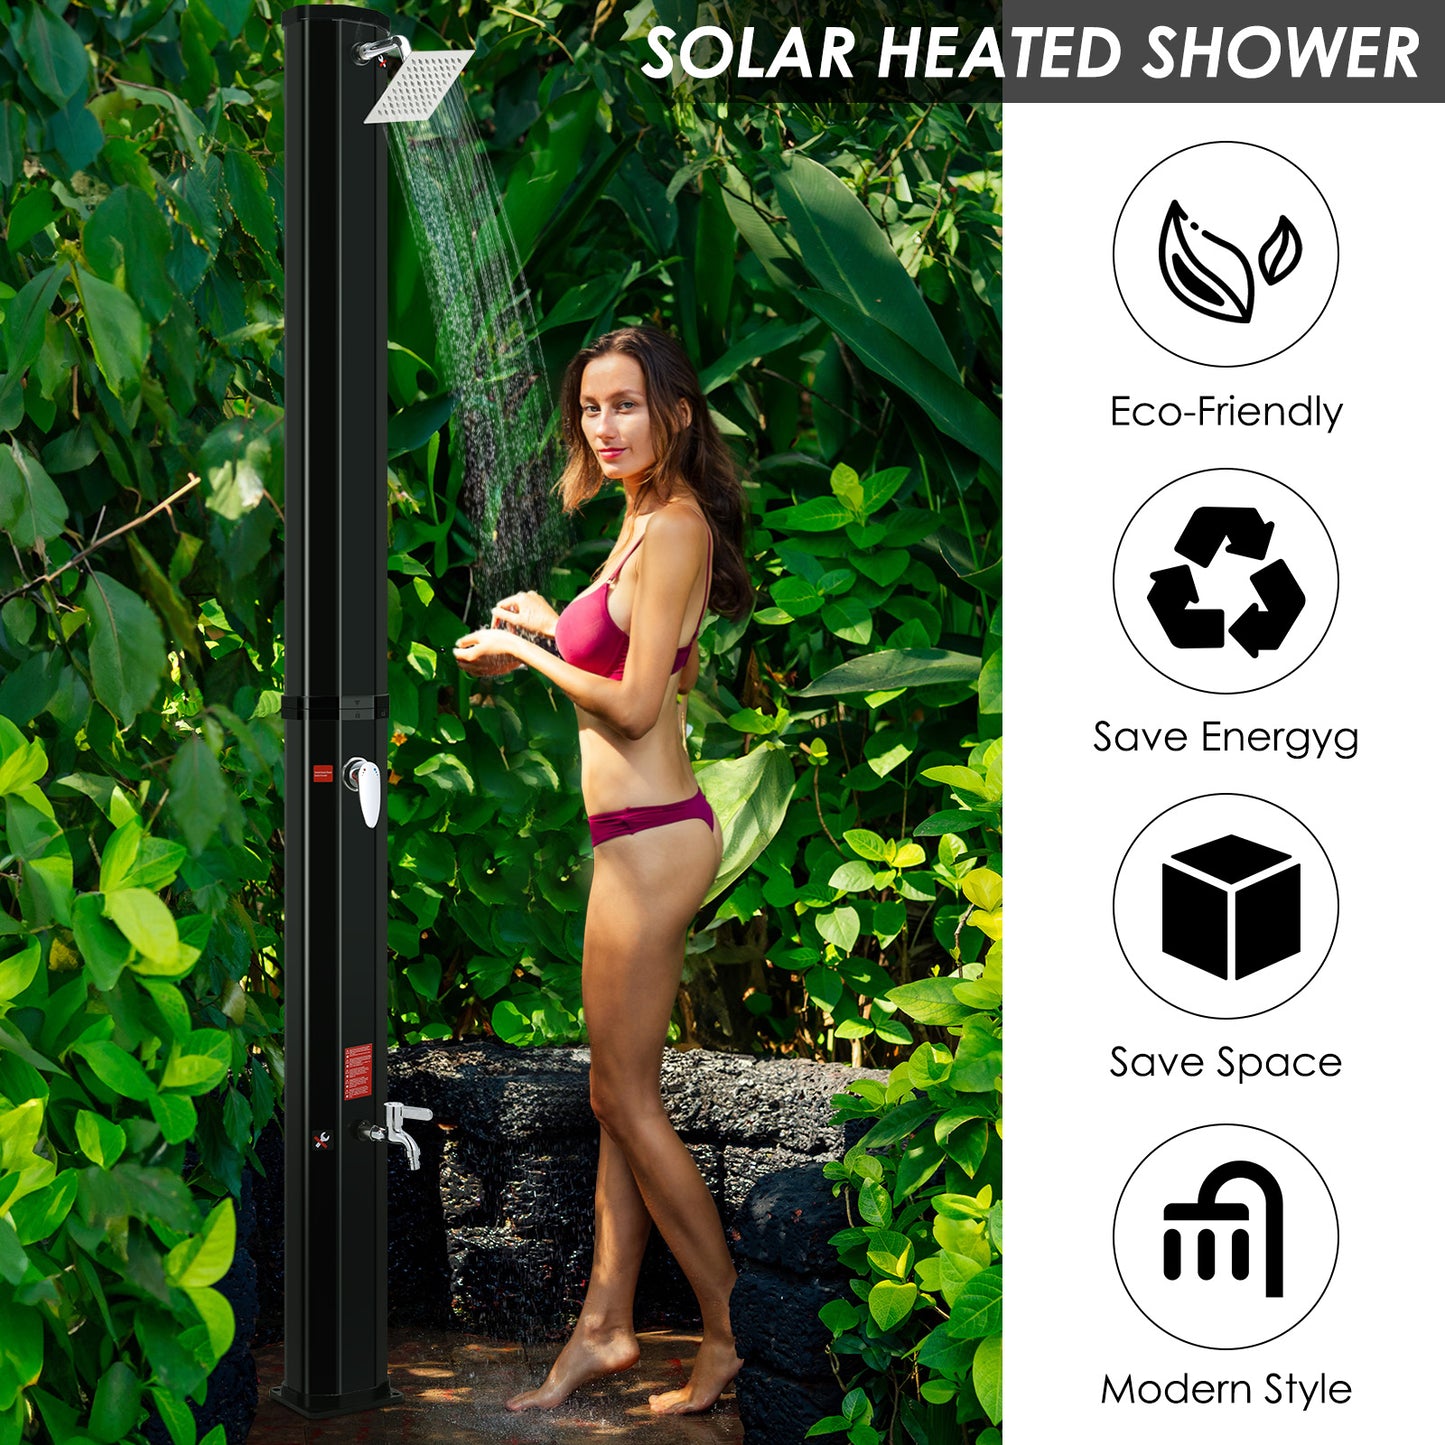 Arlopu 10.6 Gallon Outdoor Solar Heated Shower 2-Section Pool Shower with Protective Cover for Backyard, Garden, Beach